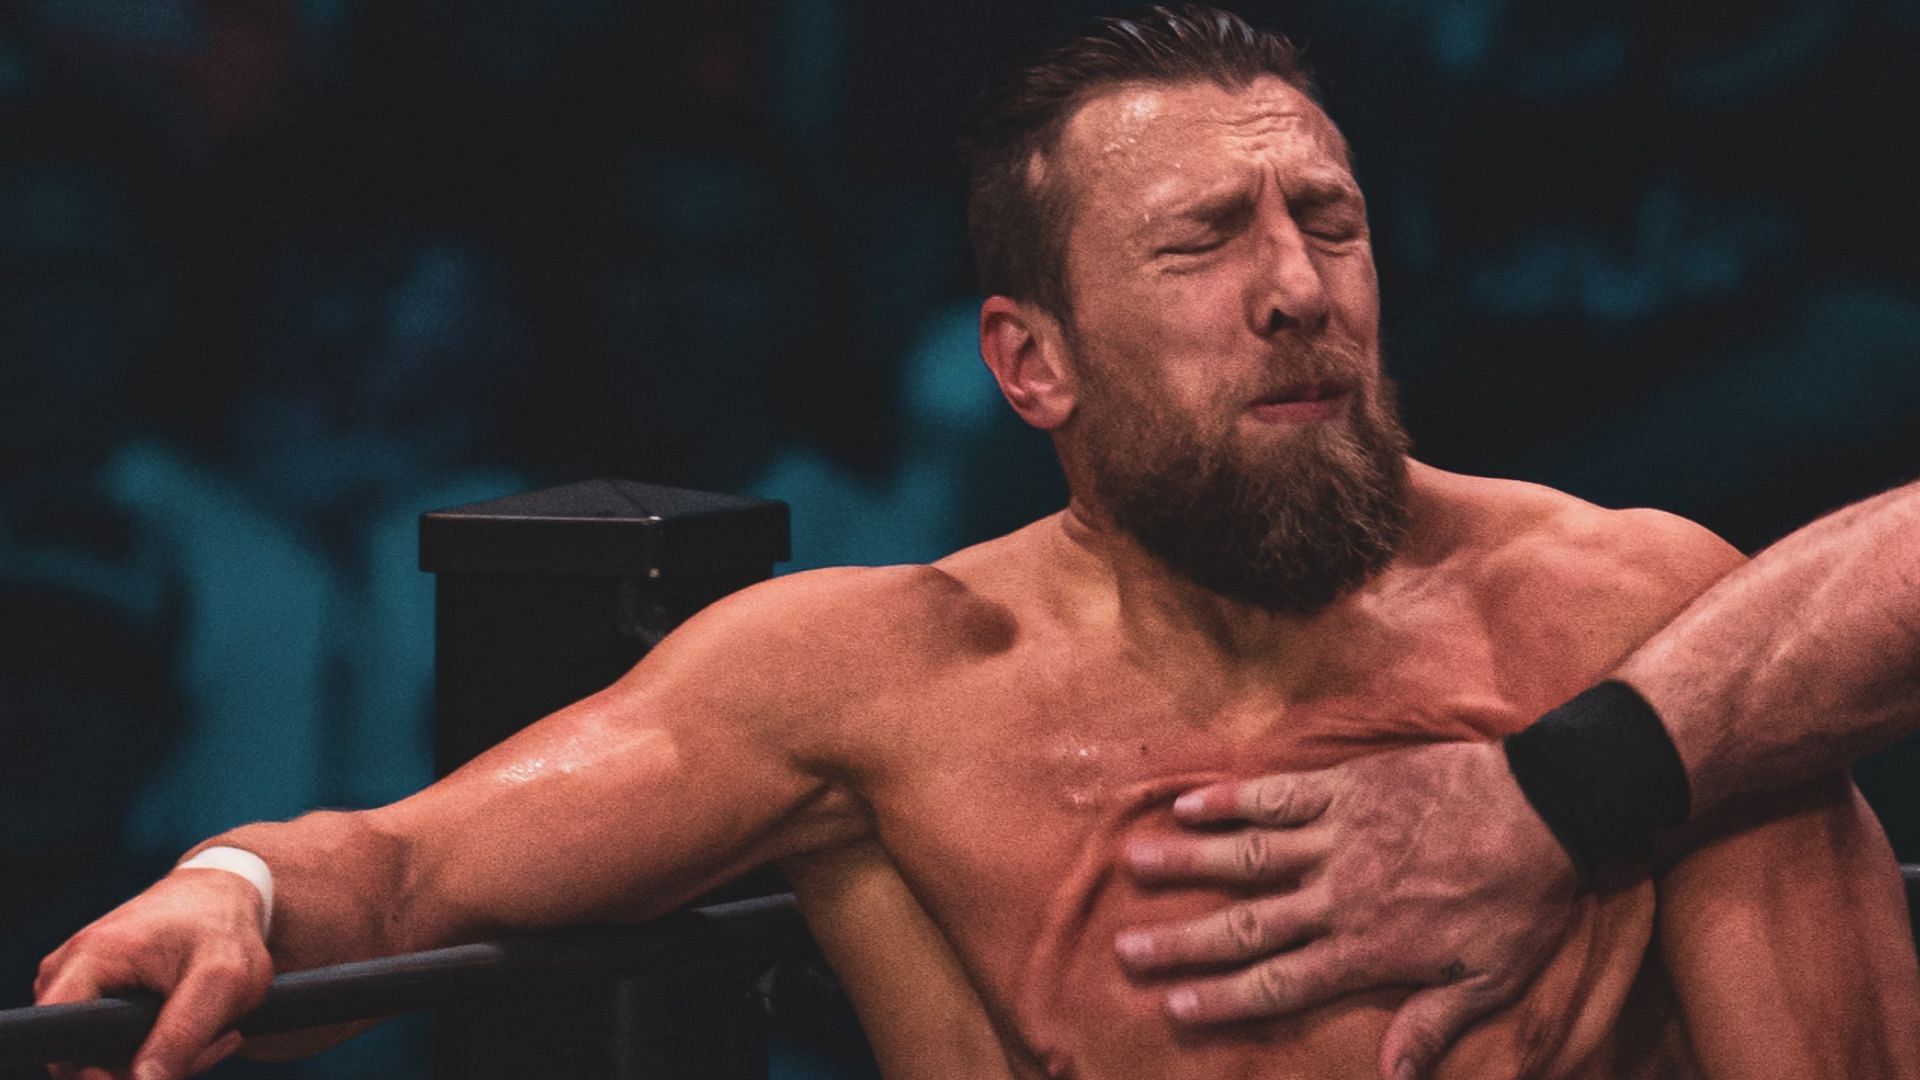 Bryan Danielson getting chopped by Jon Moxley at AEW Revolution 2022 (Credit: Jay Lee Photography)